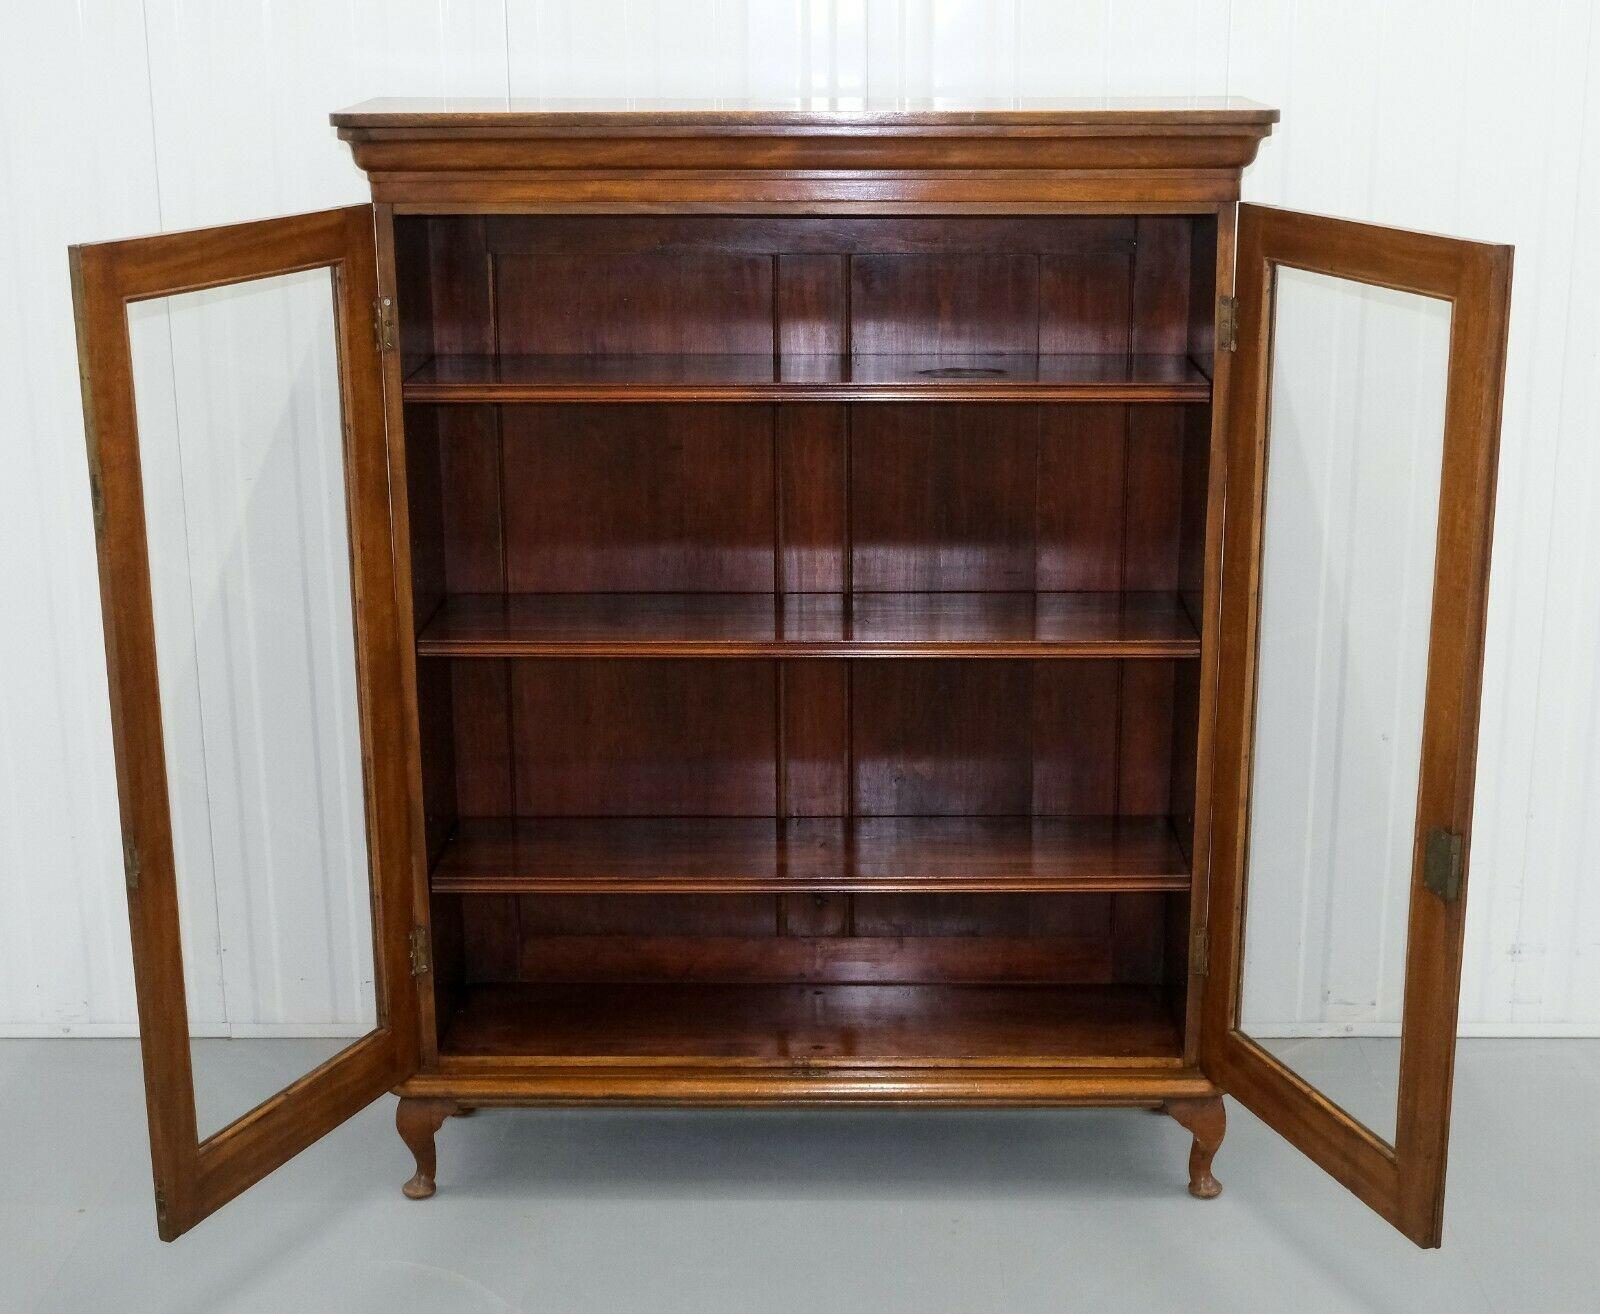 Hand-Crafted Rich Brown Hardwood Bookcase Two Doors & Adjustable Shelves on Cabriole Legs